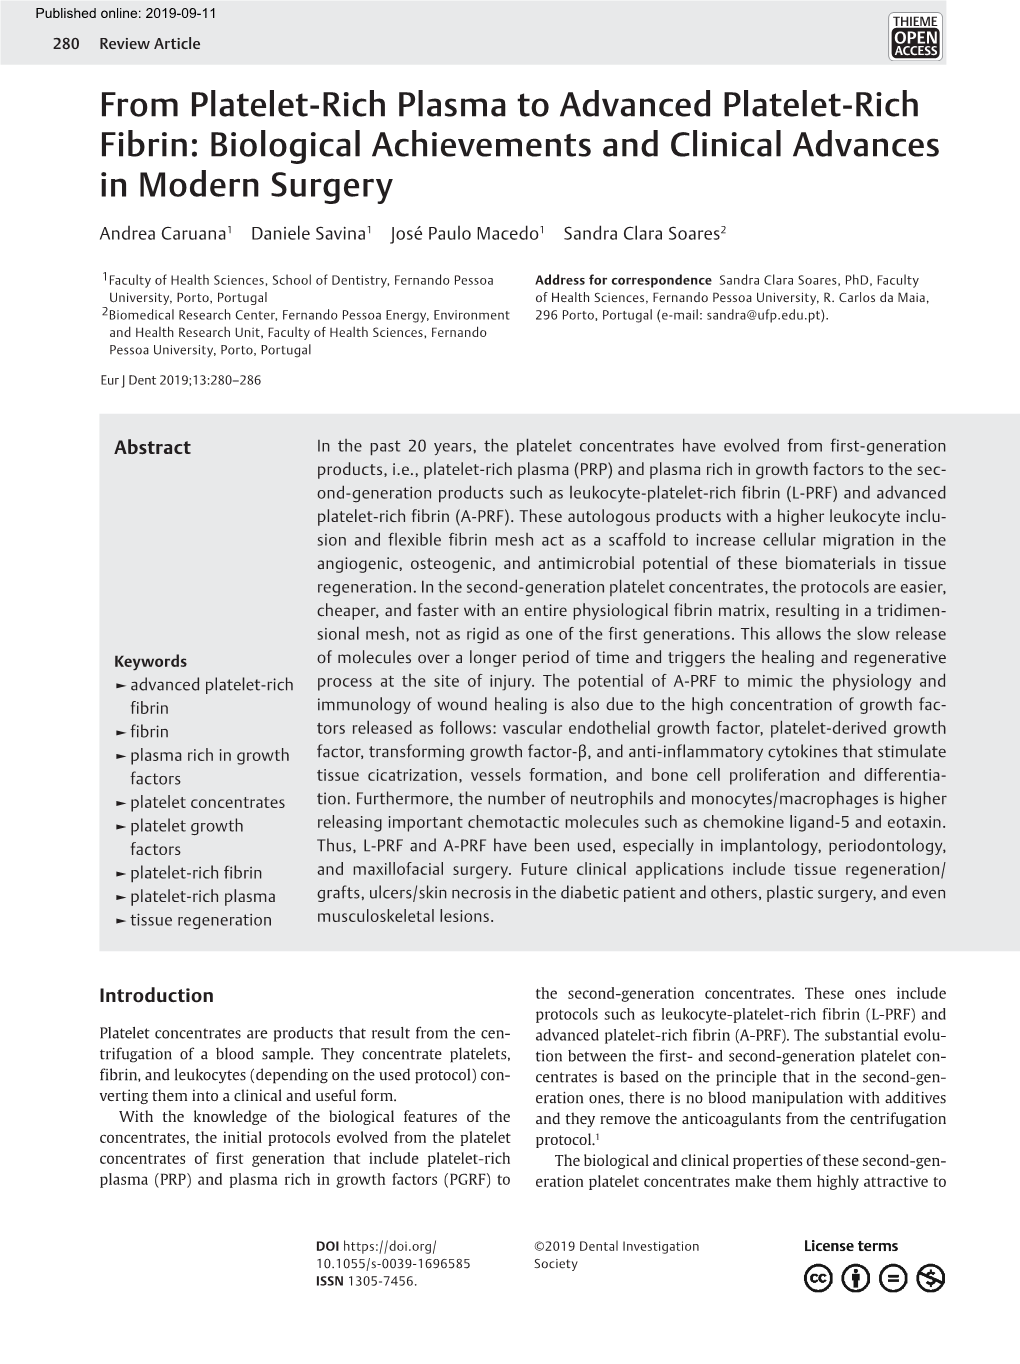 From Platelet-Rich Plasma to Advanced Platelet-Rich Fibrin: Biological Achievements and Clinical Advances in Modern Surgery